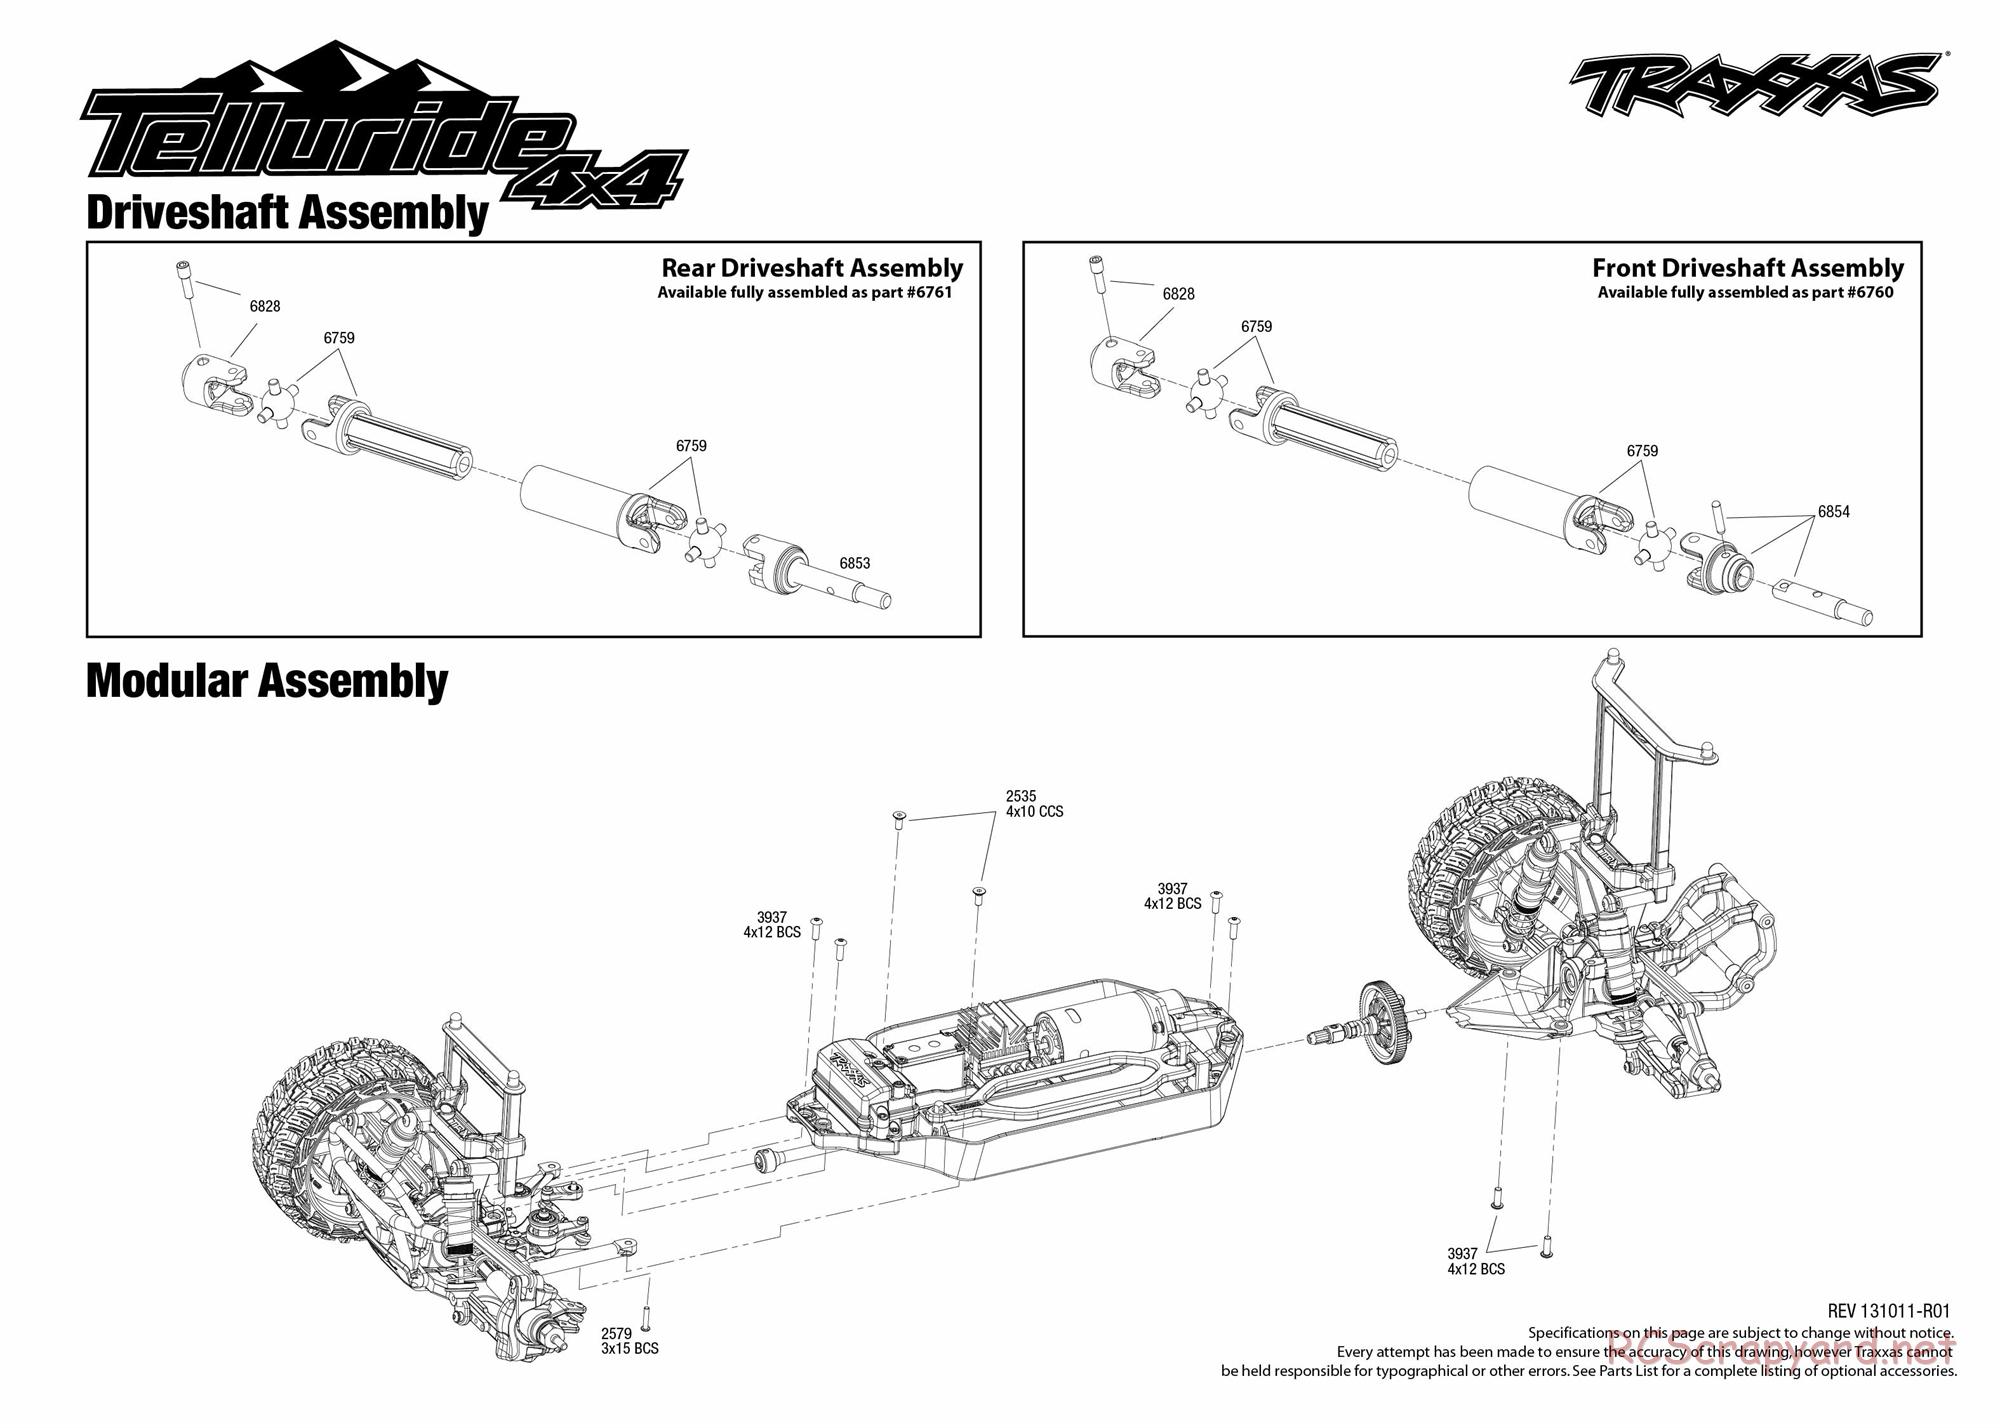 Traxxas - Telluride 4x4 (2013) - Exploded Views - Page 2